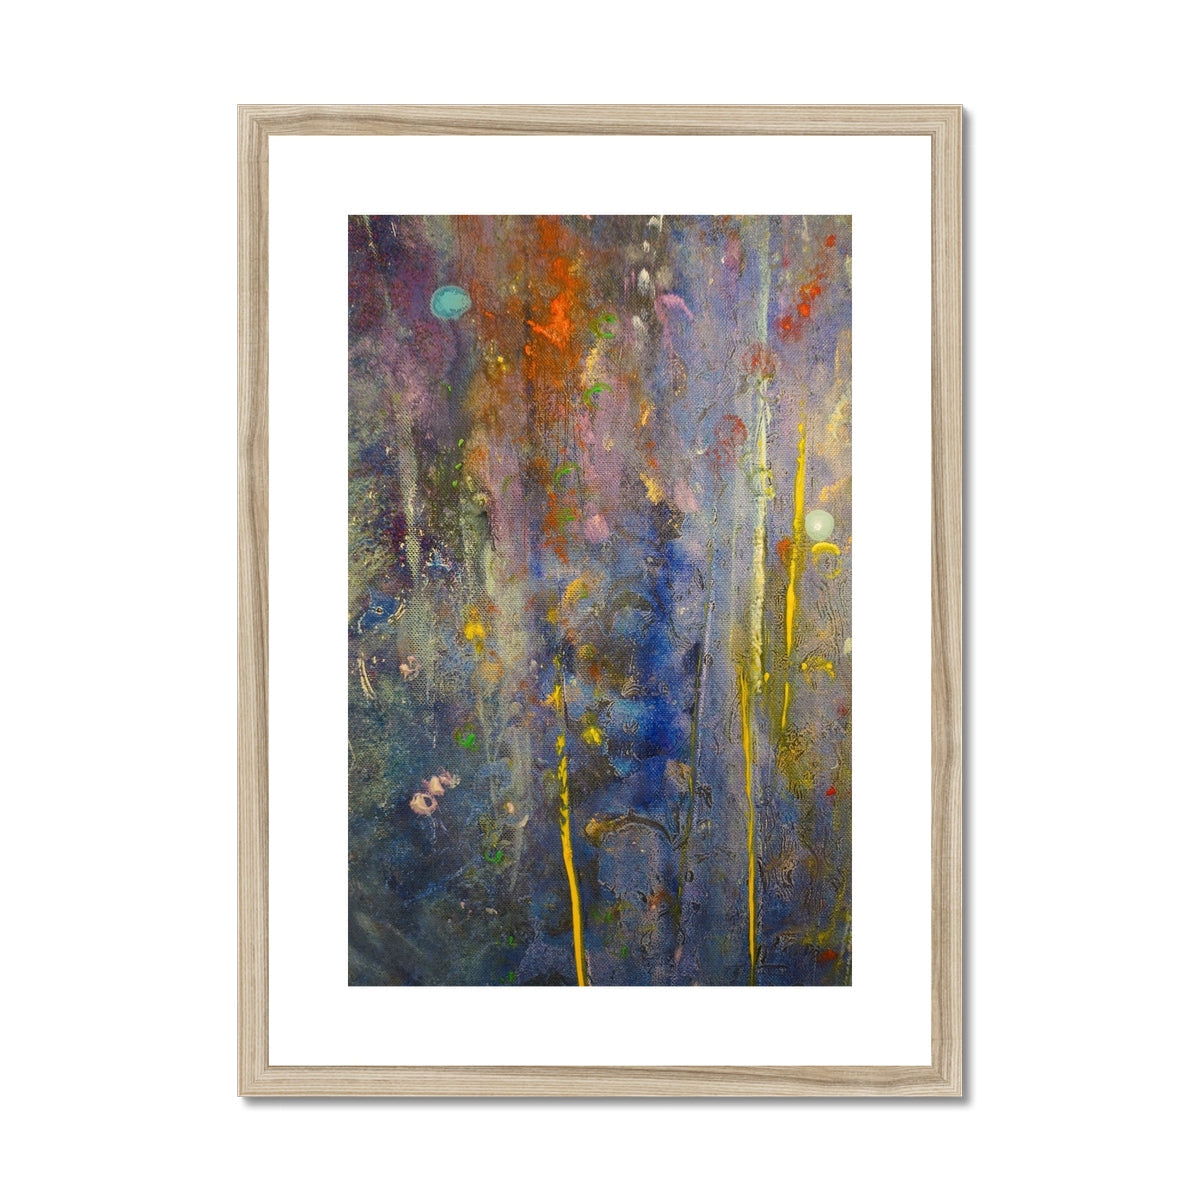 Cairngorms Waterfall Abstract Painting | Framed & Mounted Prints From Scotland-Framed & Mounted Prints-Abstract & Impressionistic Art Gallery-A2 Portrait-Natural Frame-Paintings, Prints, Homeware, Art Gifts From Scotland By Scottish Artist Kevin Hunter